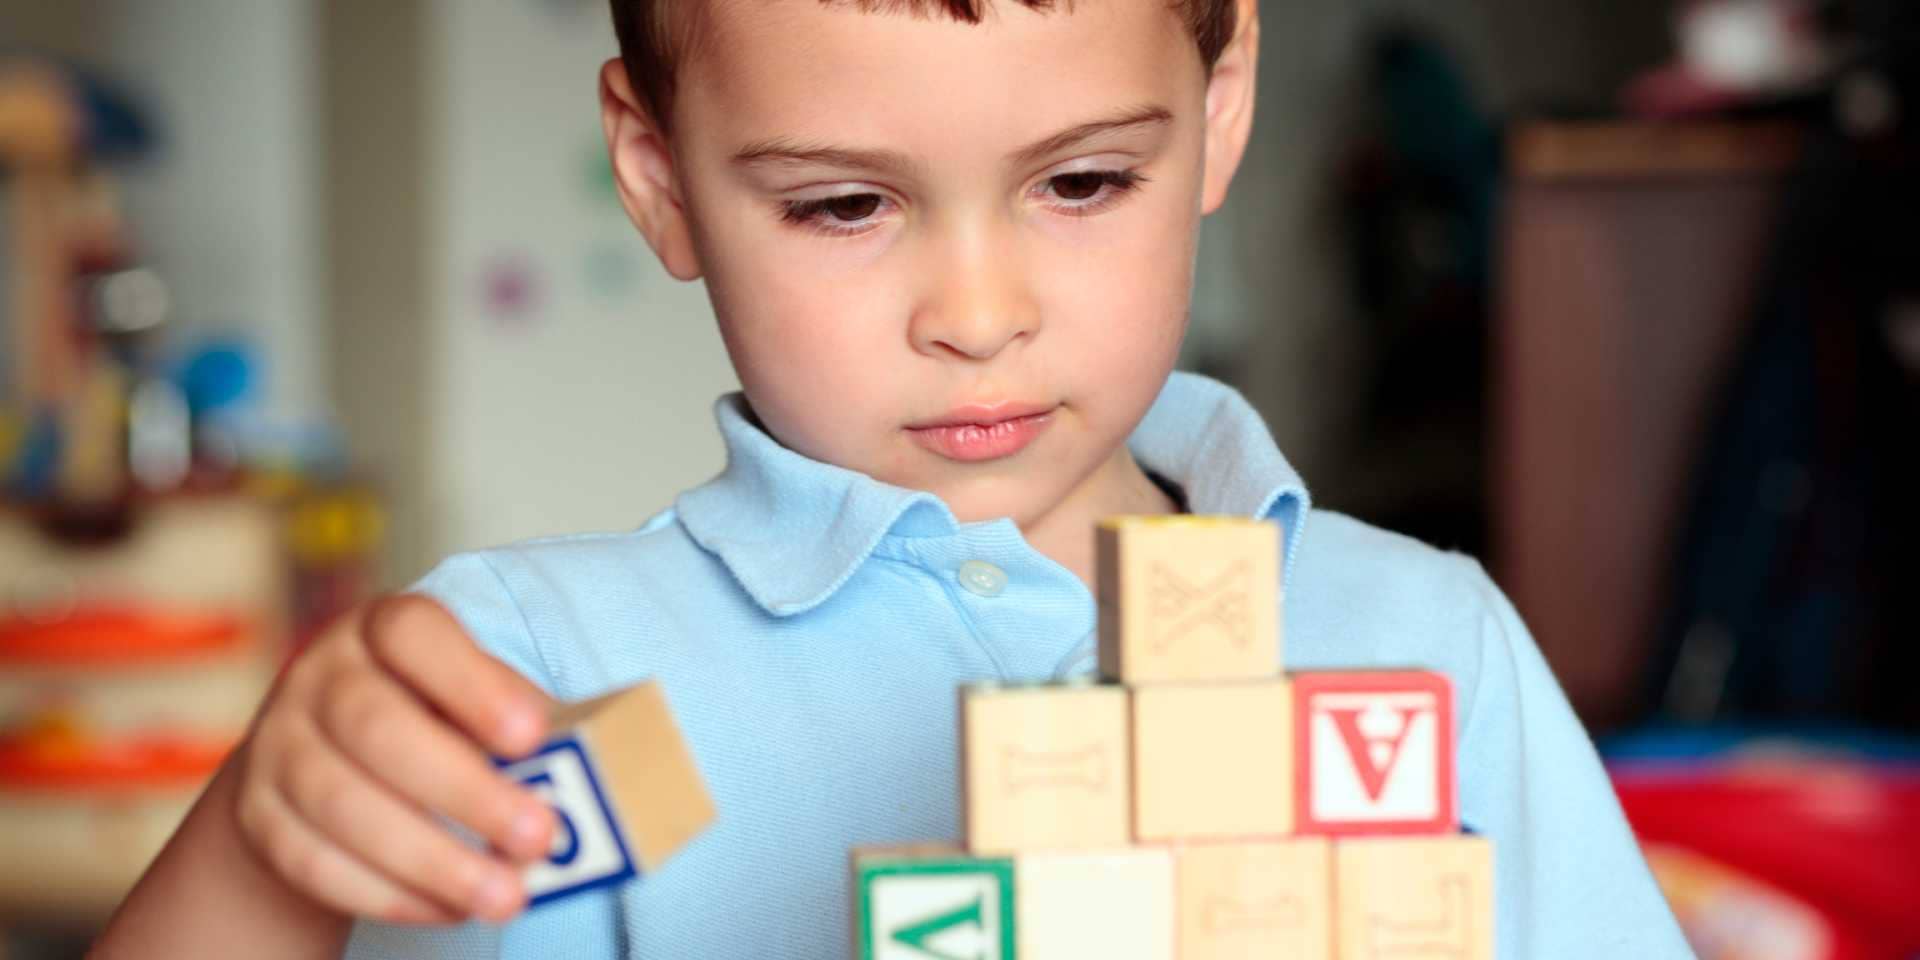 A young boy in a school uniform is stacking wooden blocks.